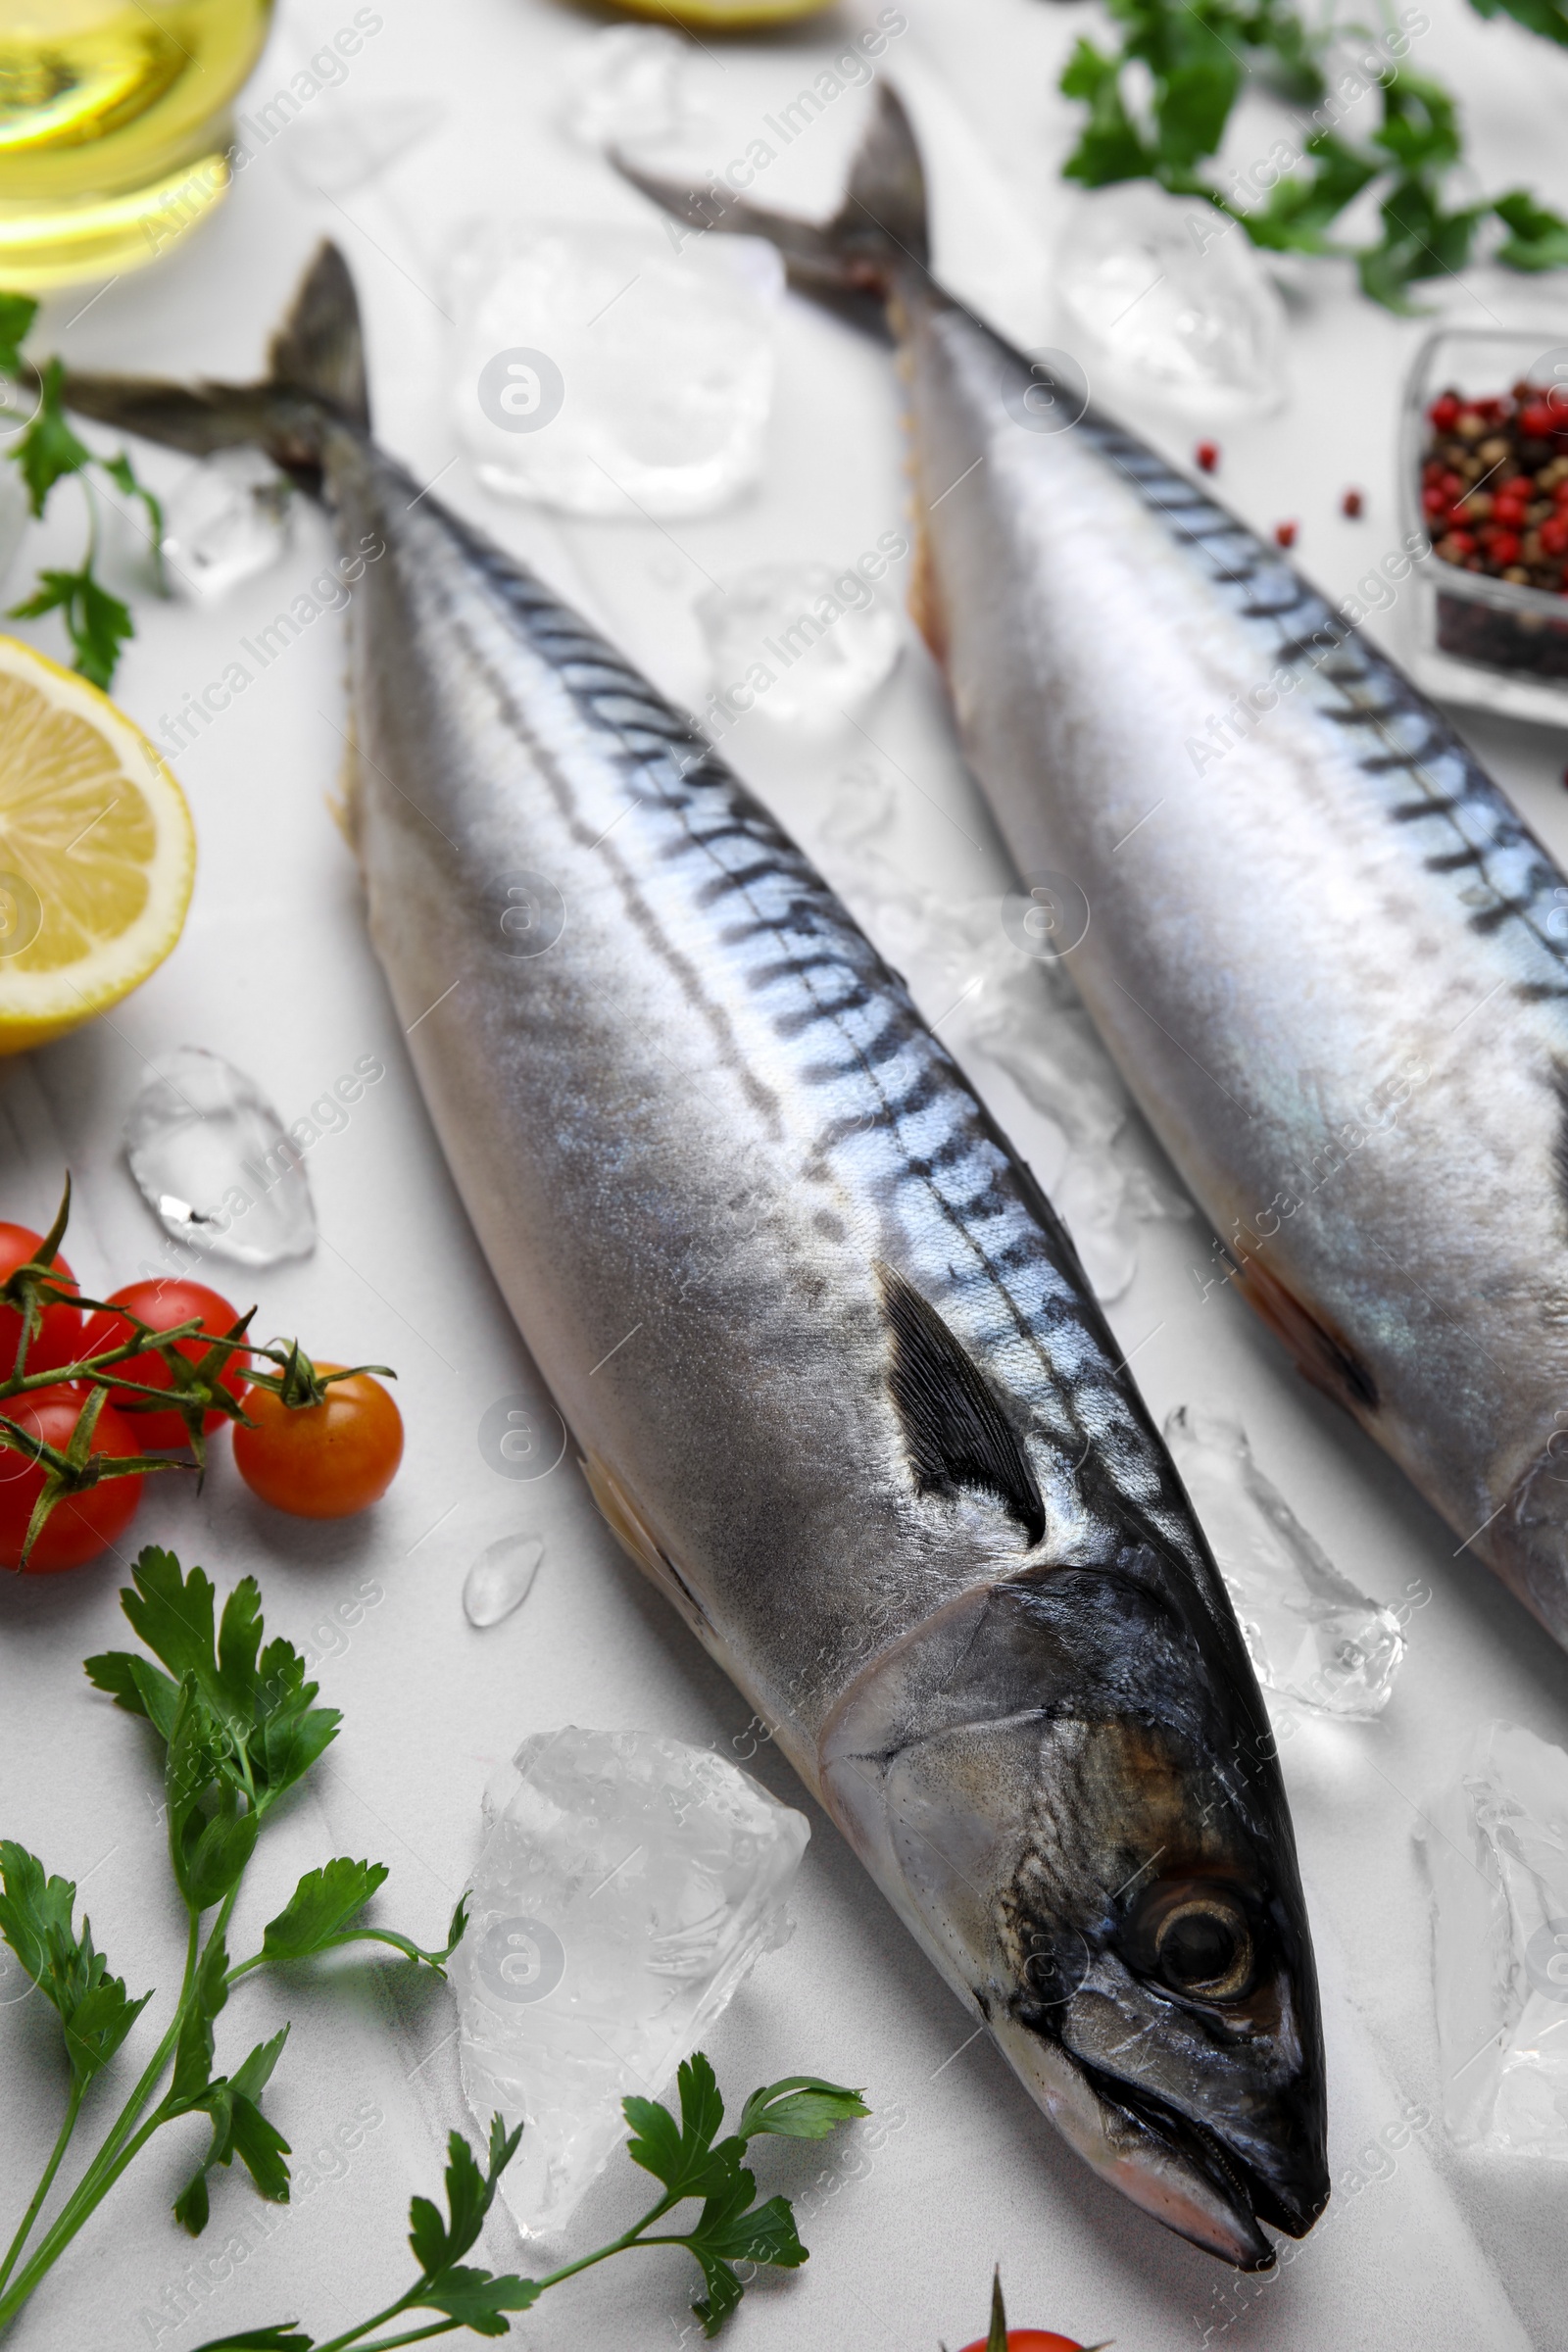 Photo of Raw mackerel, tomatoes and parsley on white table, above view